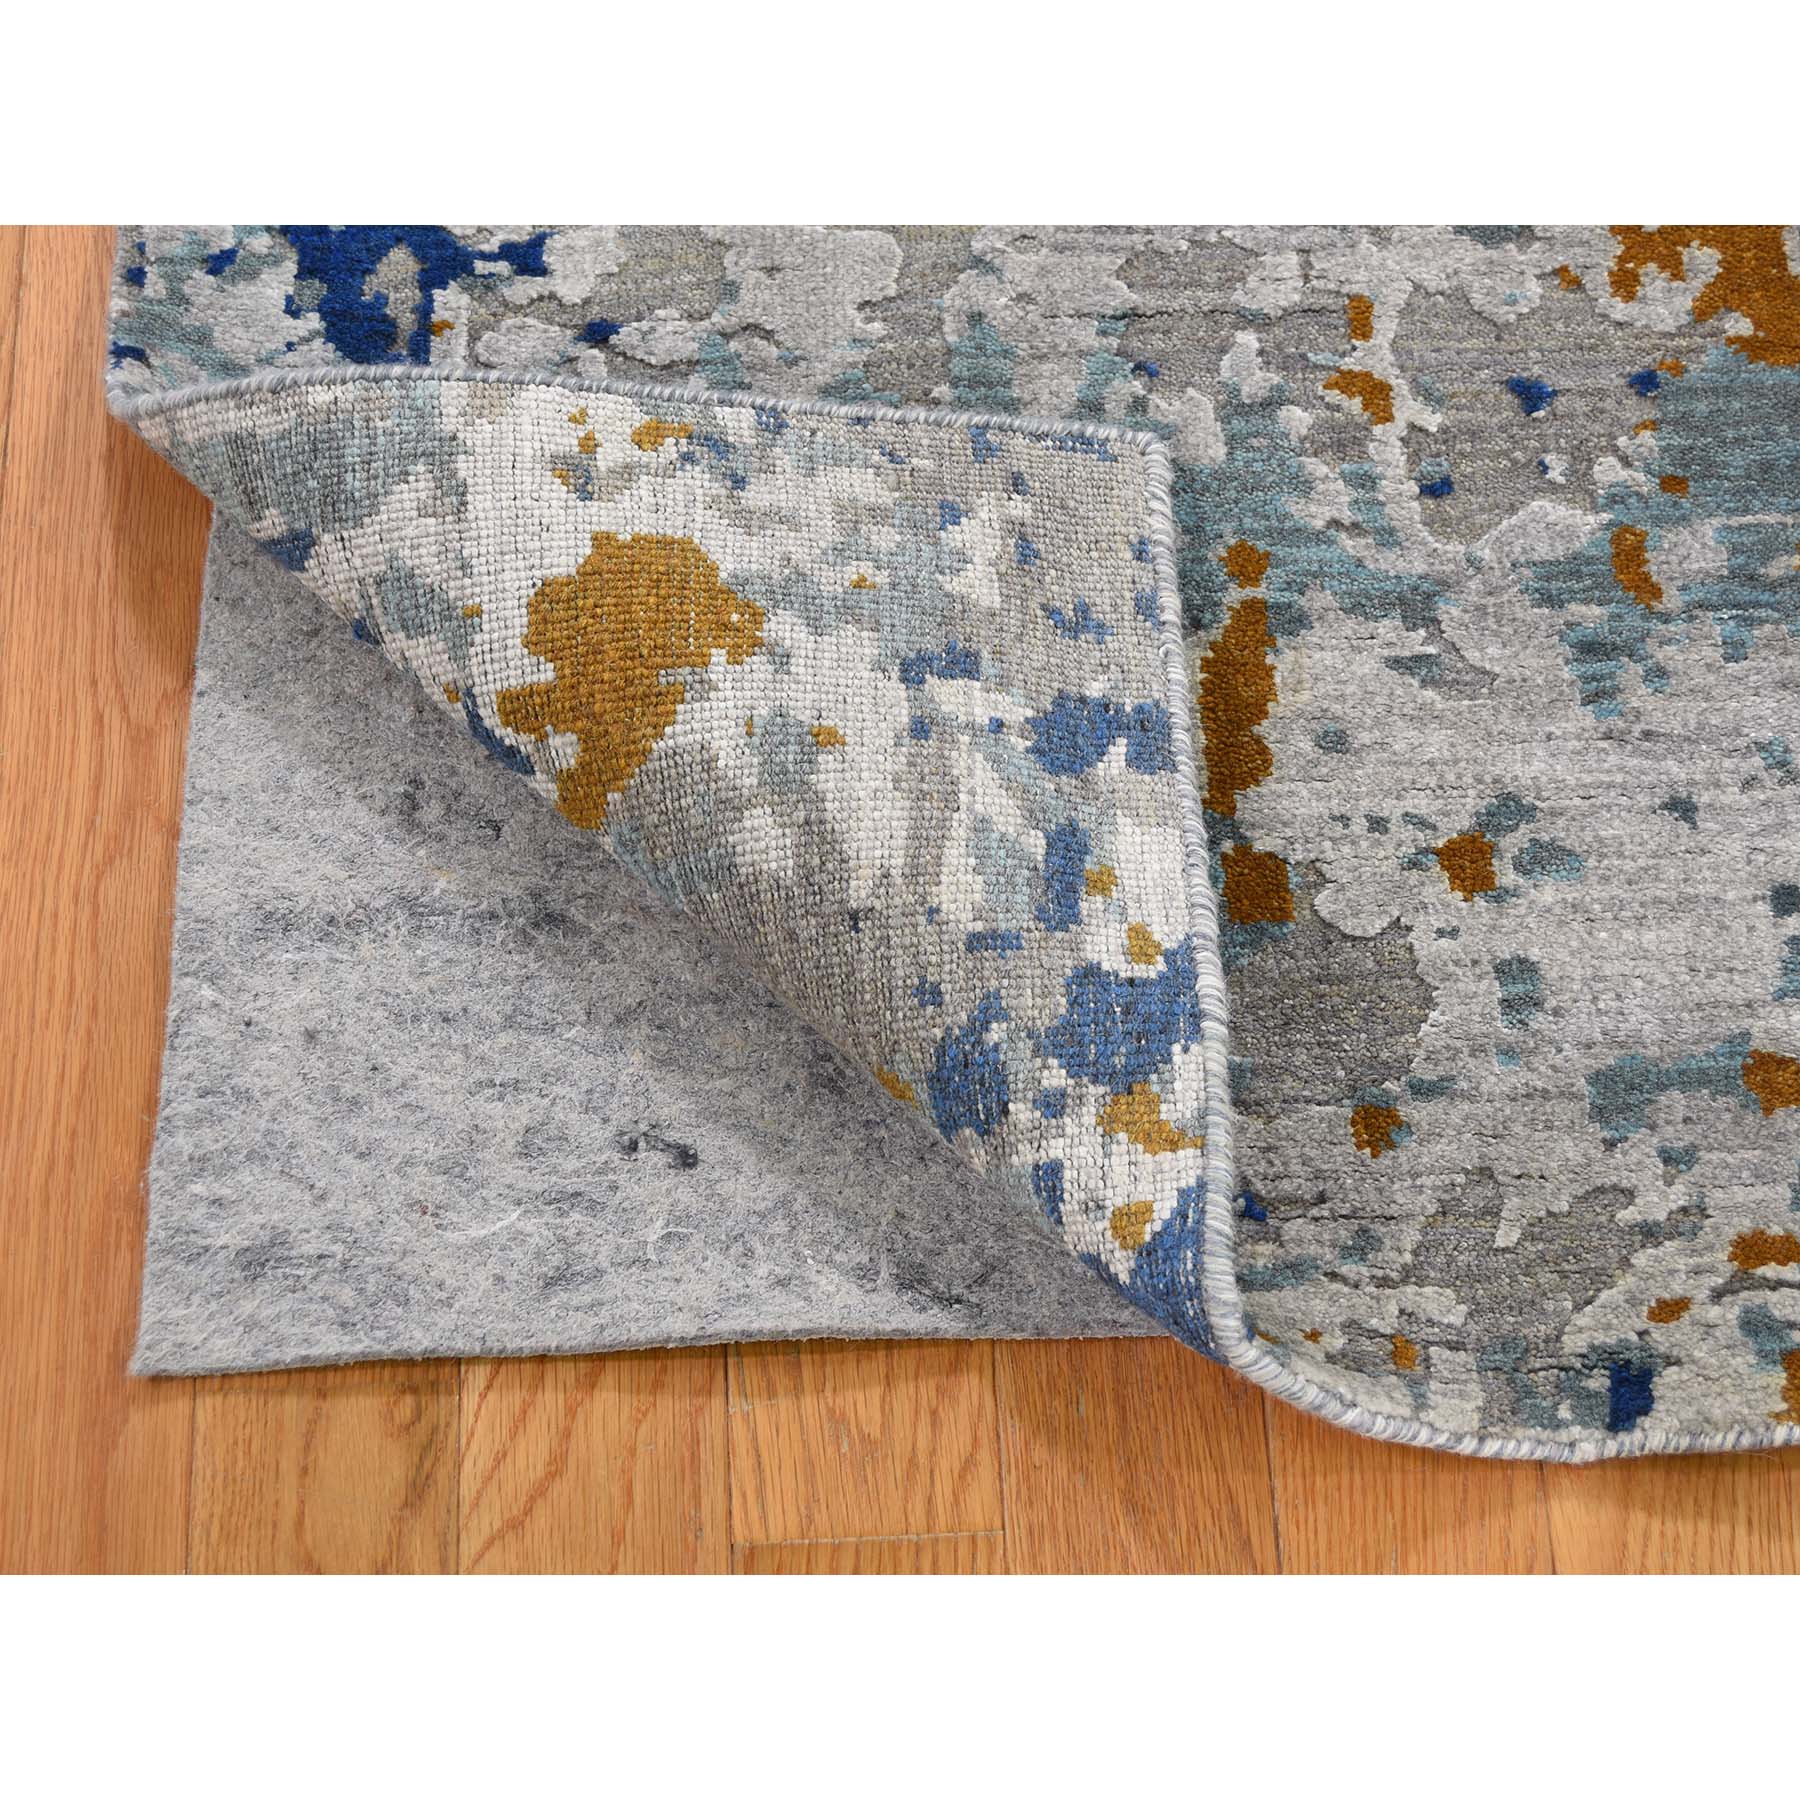 3-10 x5-10  Hi-Low Pile Abstract Design Wool And Silk Runner Hand-Knotted Modern Rug 